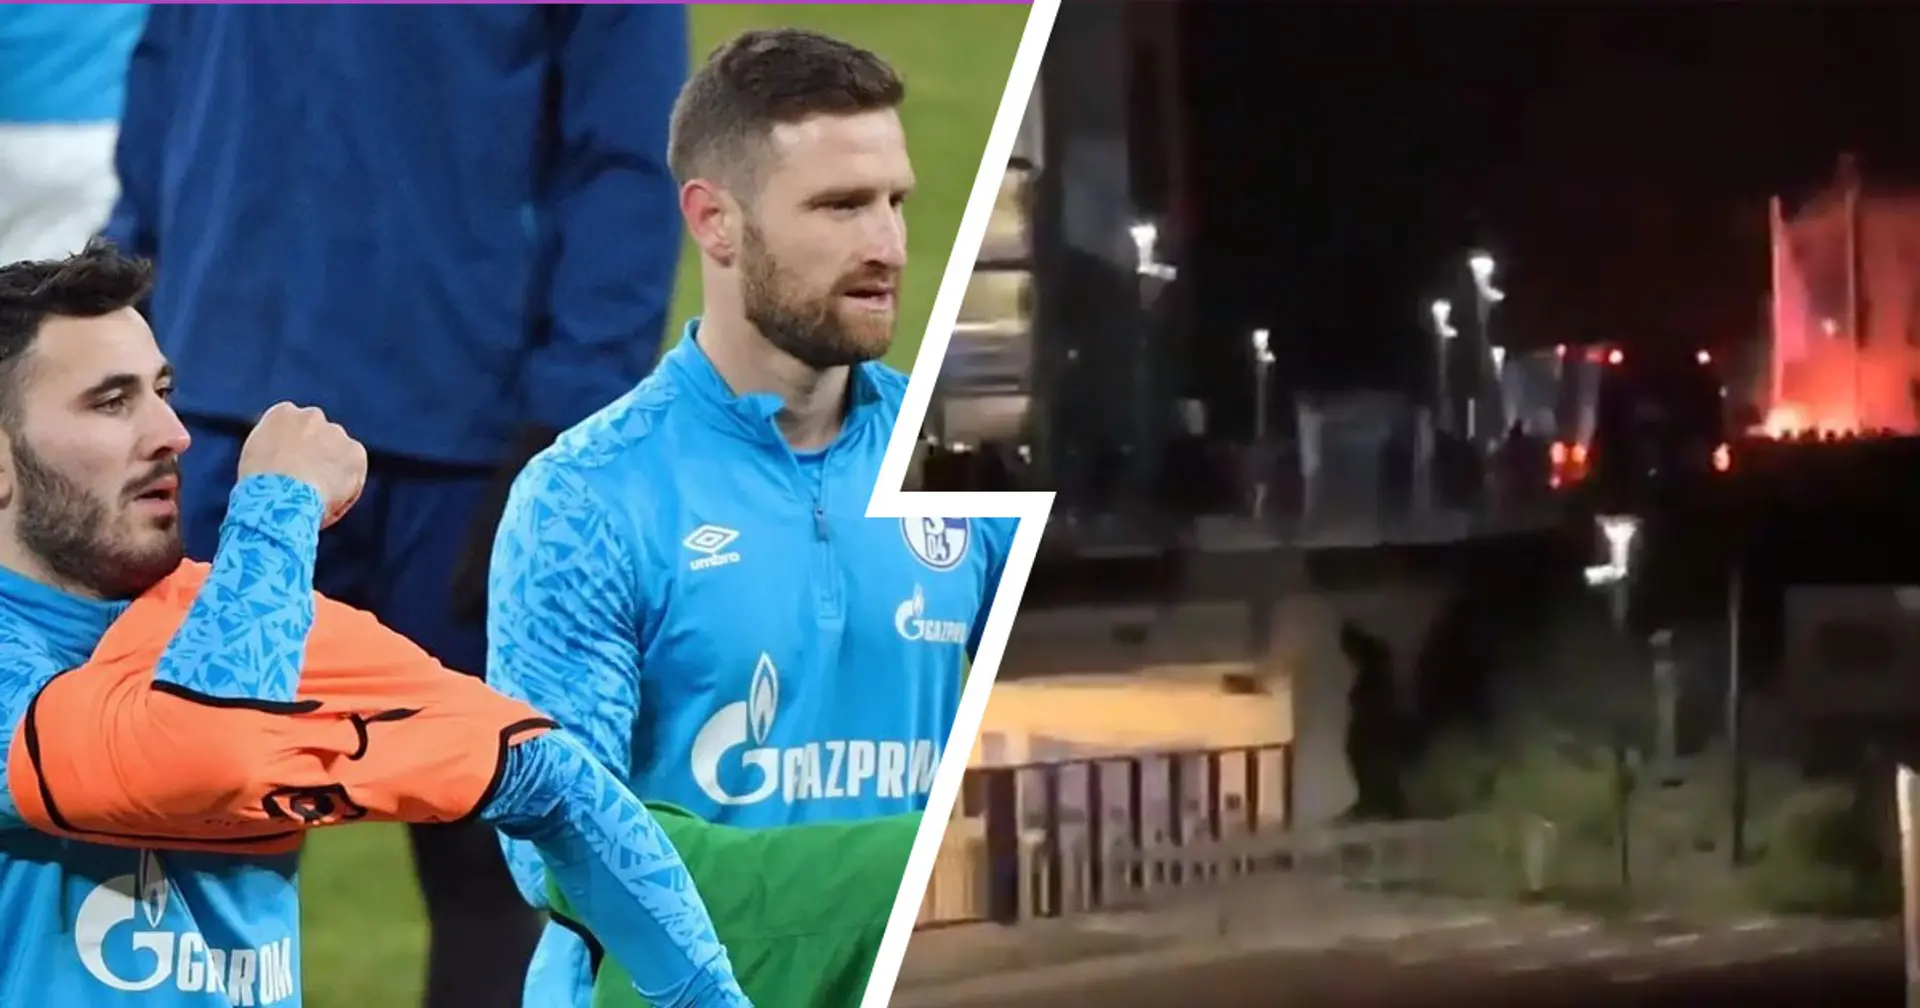 Mustafi and Kolasinac forced to run away from angry fans after Schalke’s relegation from Bundesliga